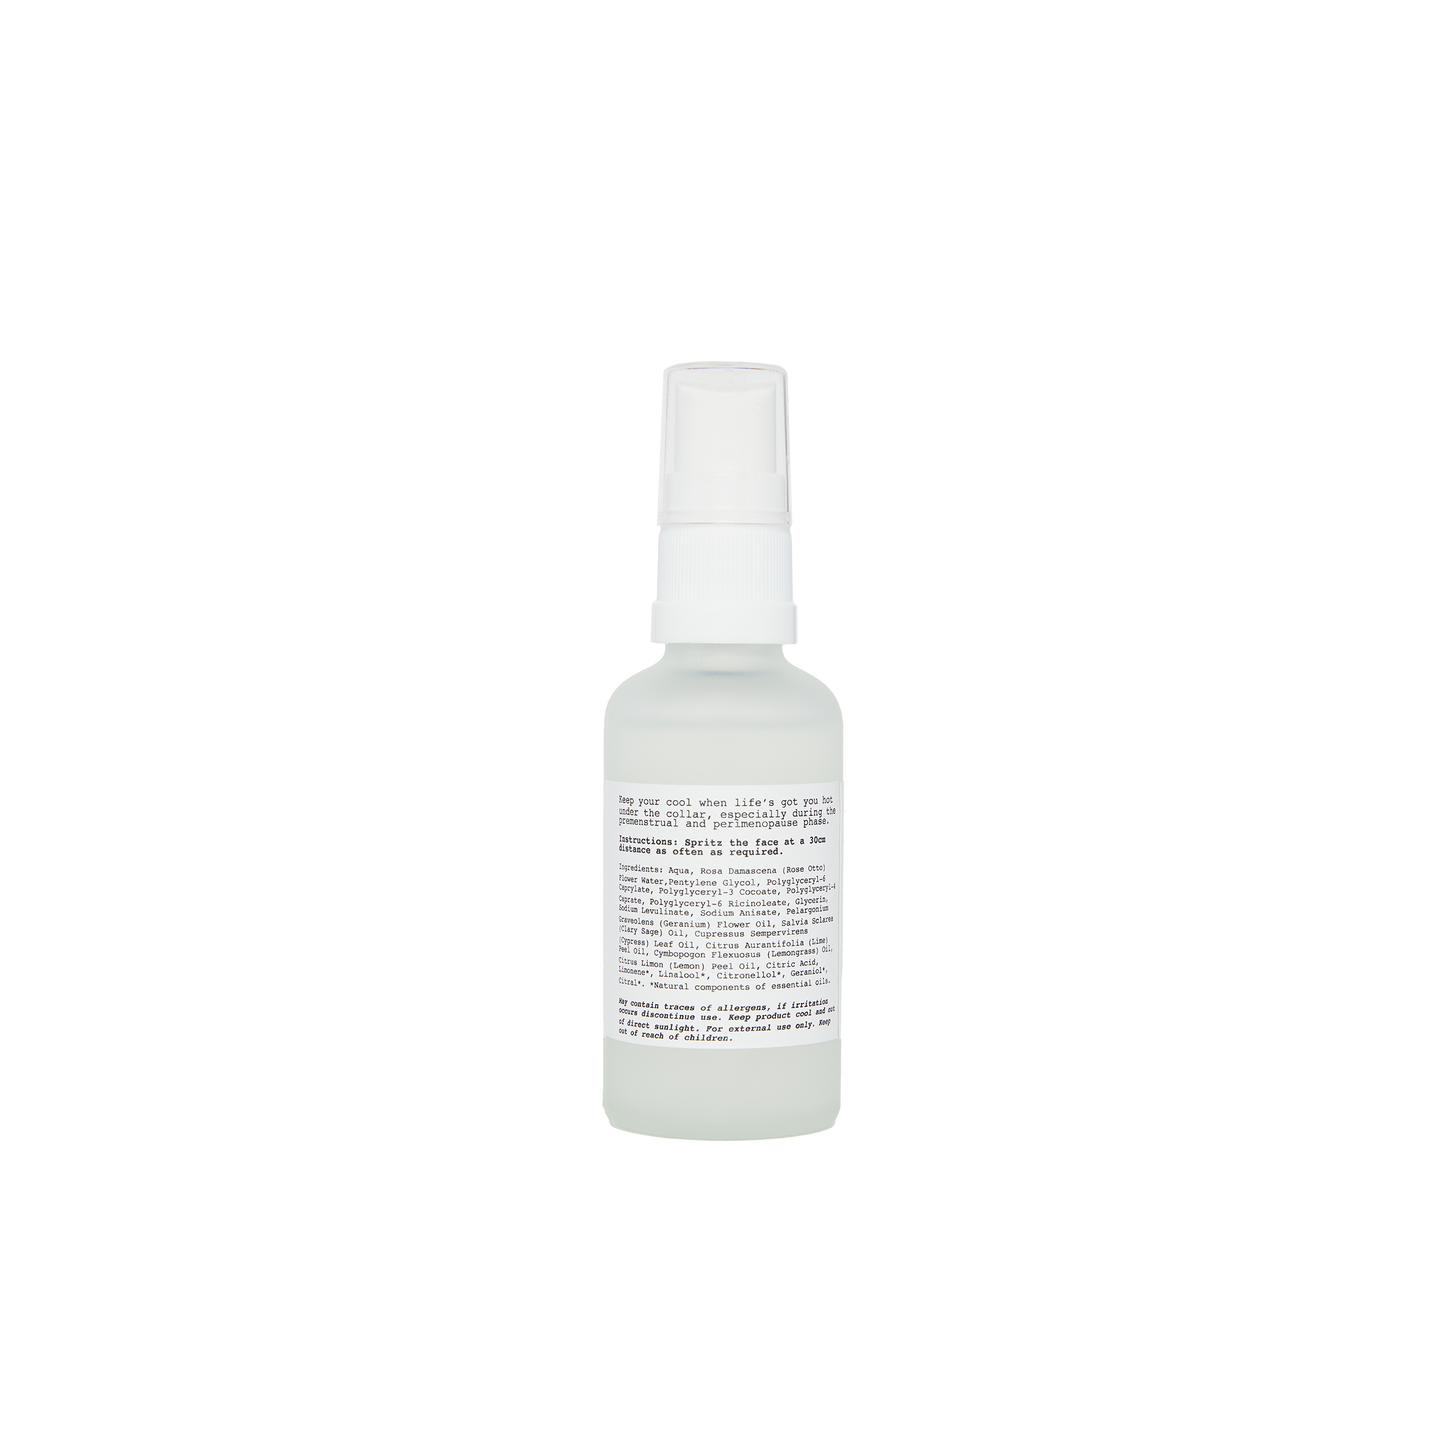 Cool and calm menopause hot flush mist